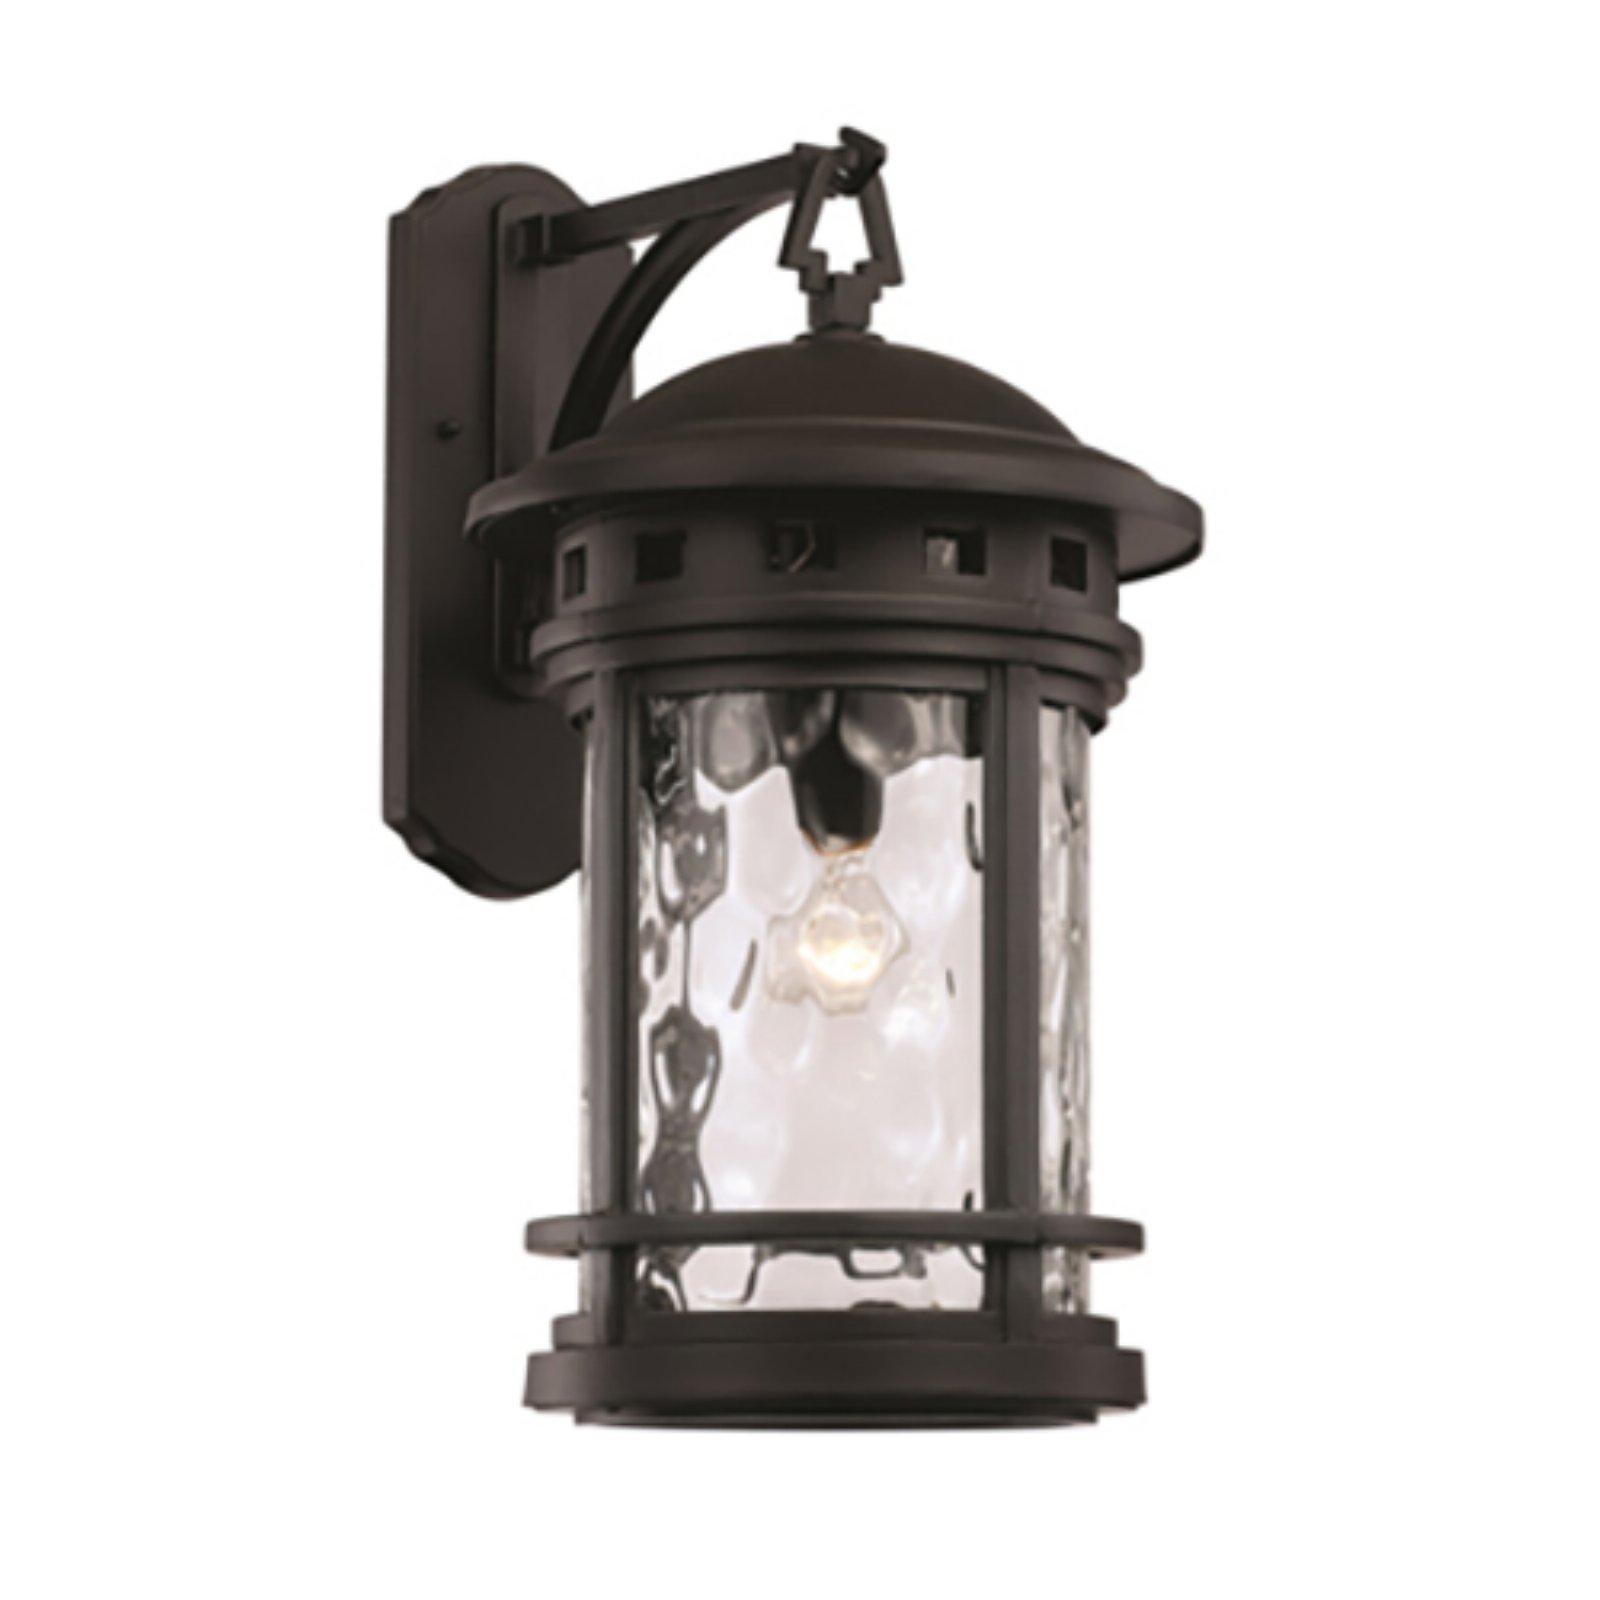 Trans Globe Lighting Boardwalk 4037 Outdoor Wall Lantern with Water Glass - image 1 of 2